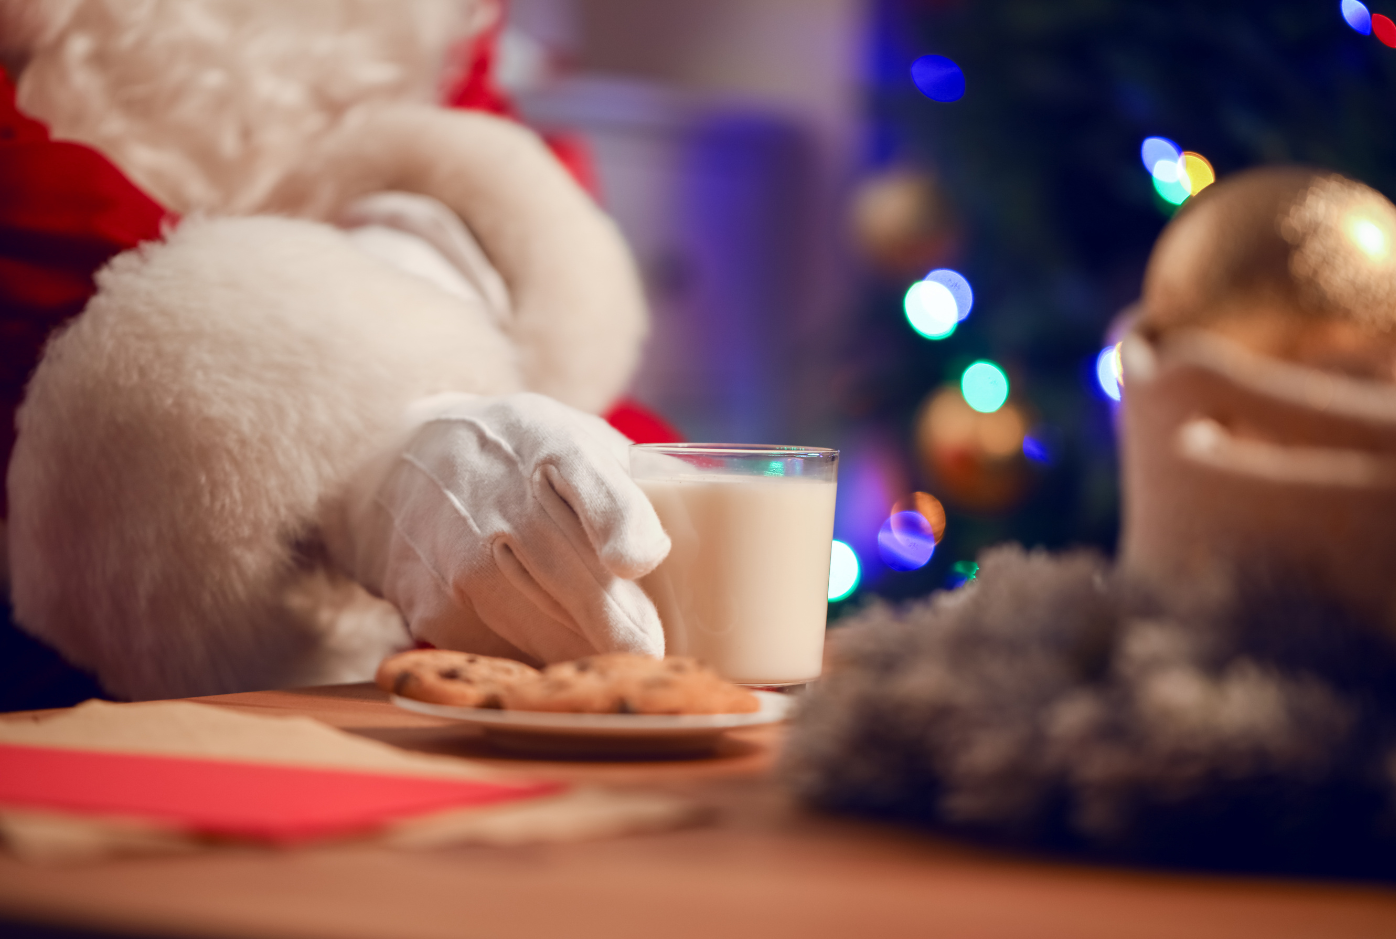 milk and cookies santa claus tradition